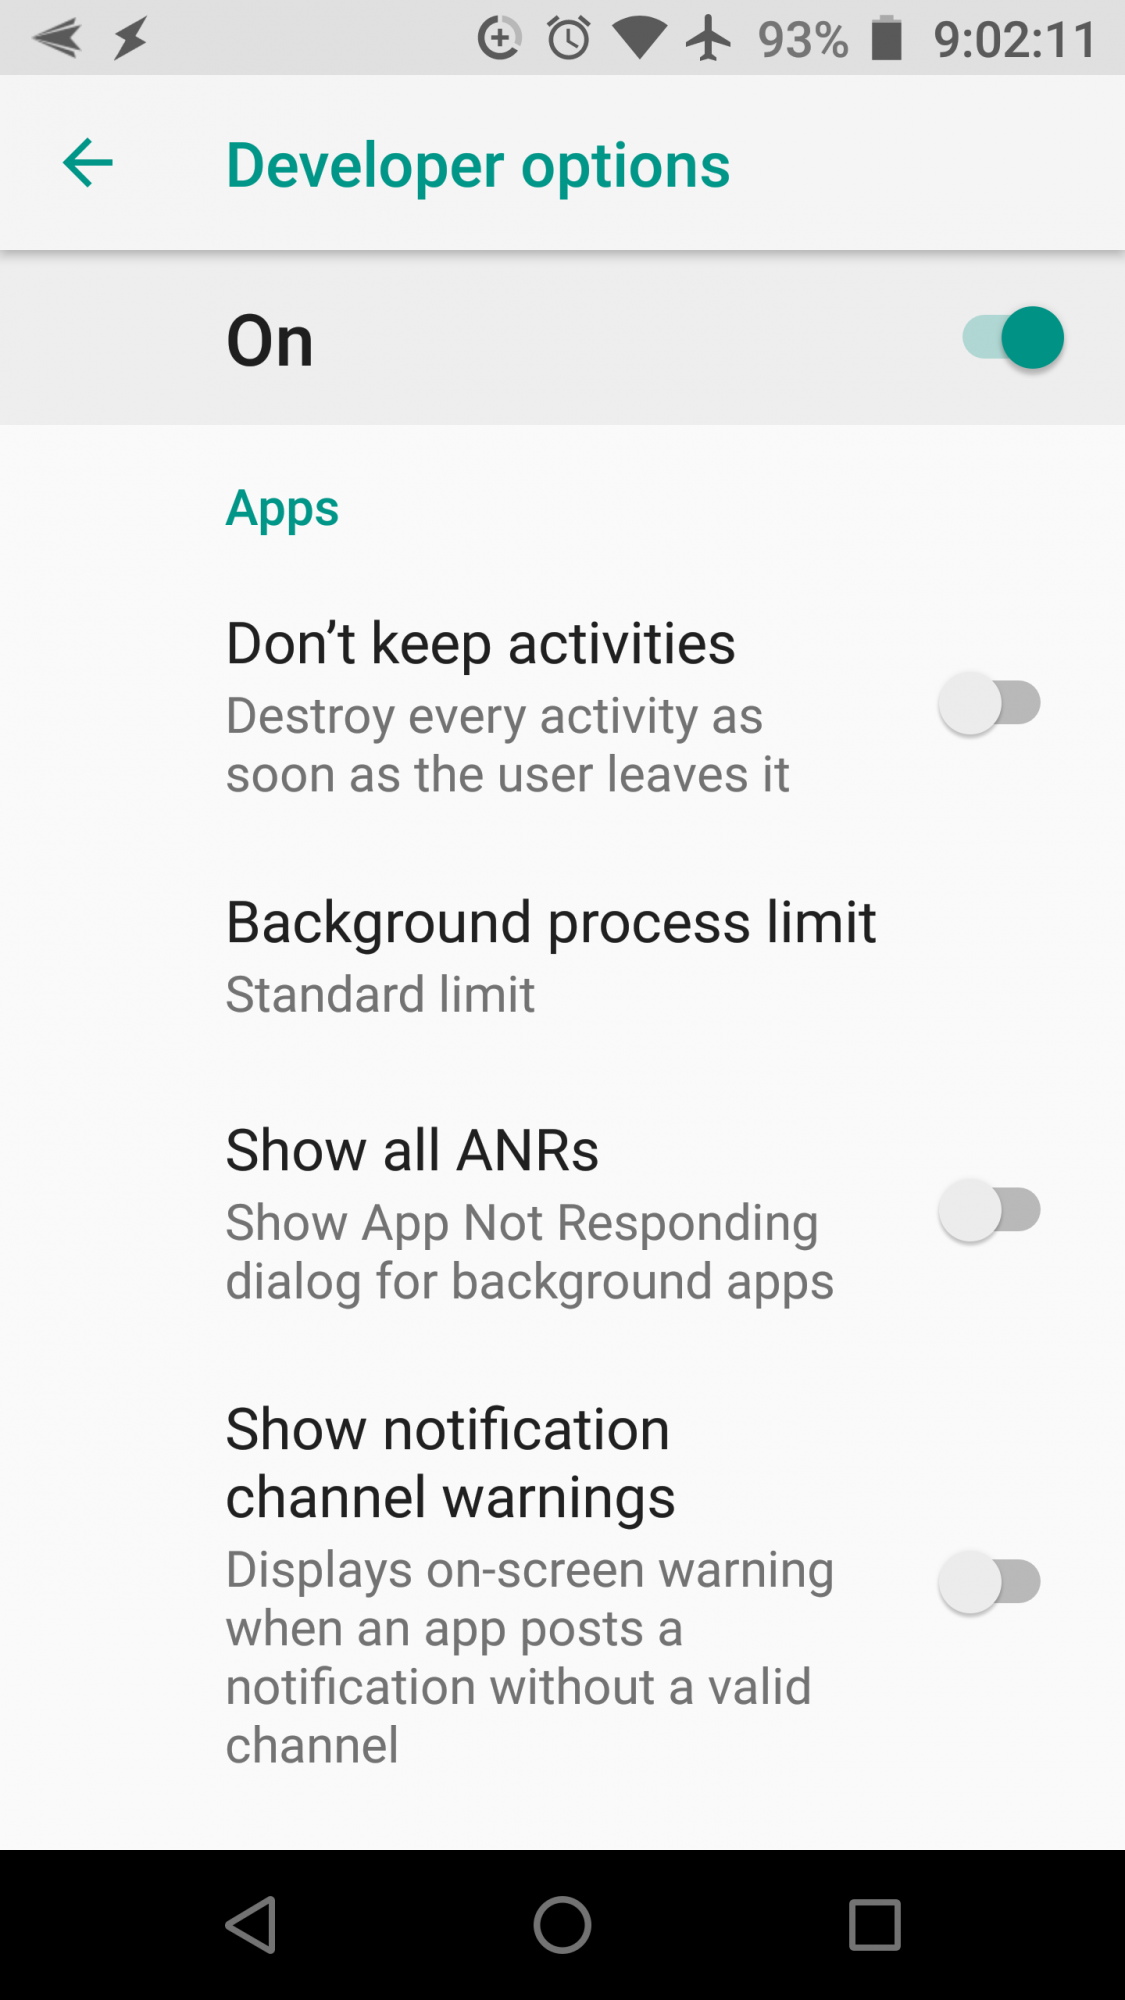 But I have been using my phone... | Android Forums